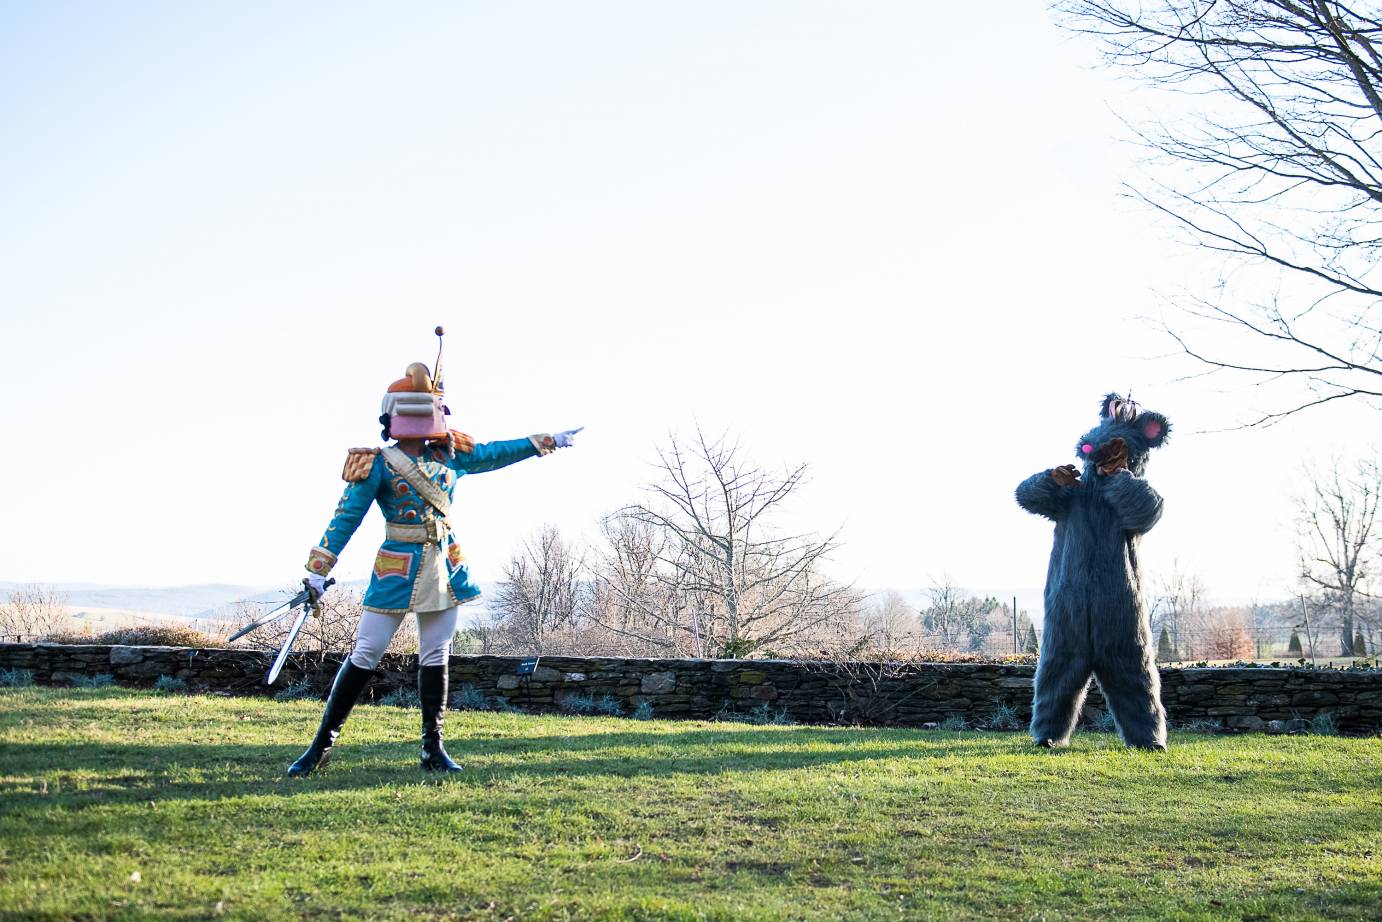 The Mouse King and the Nutcracker duel on the grounds of Wethersfield